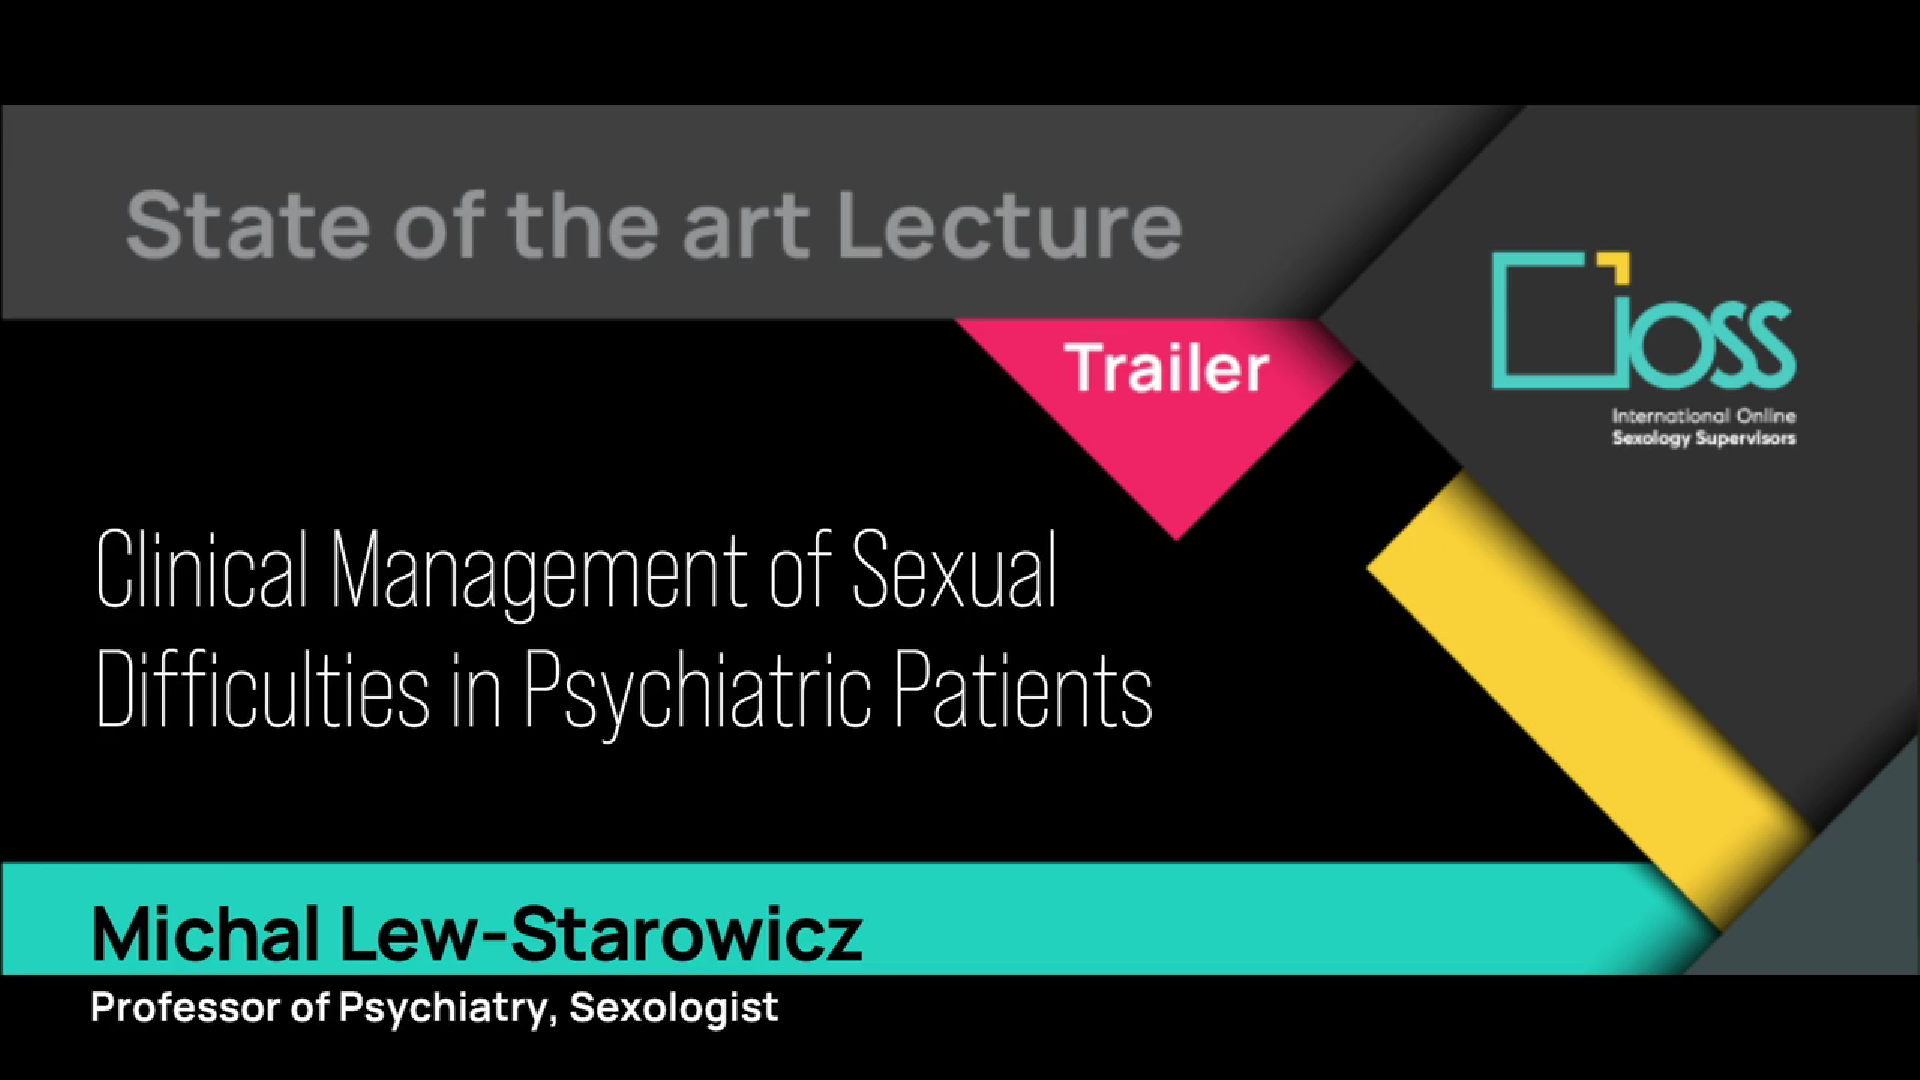 Trailer Clinical Management of Sexual Difficulties in Psychiatric Patients